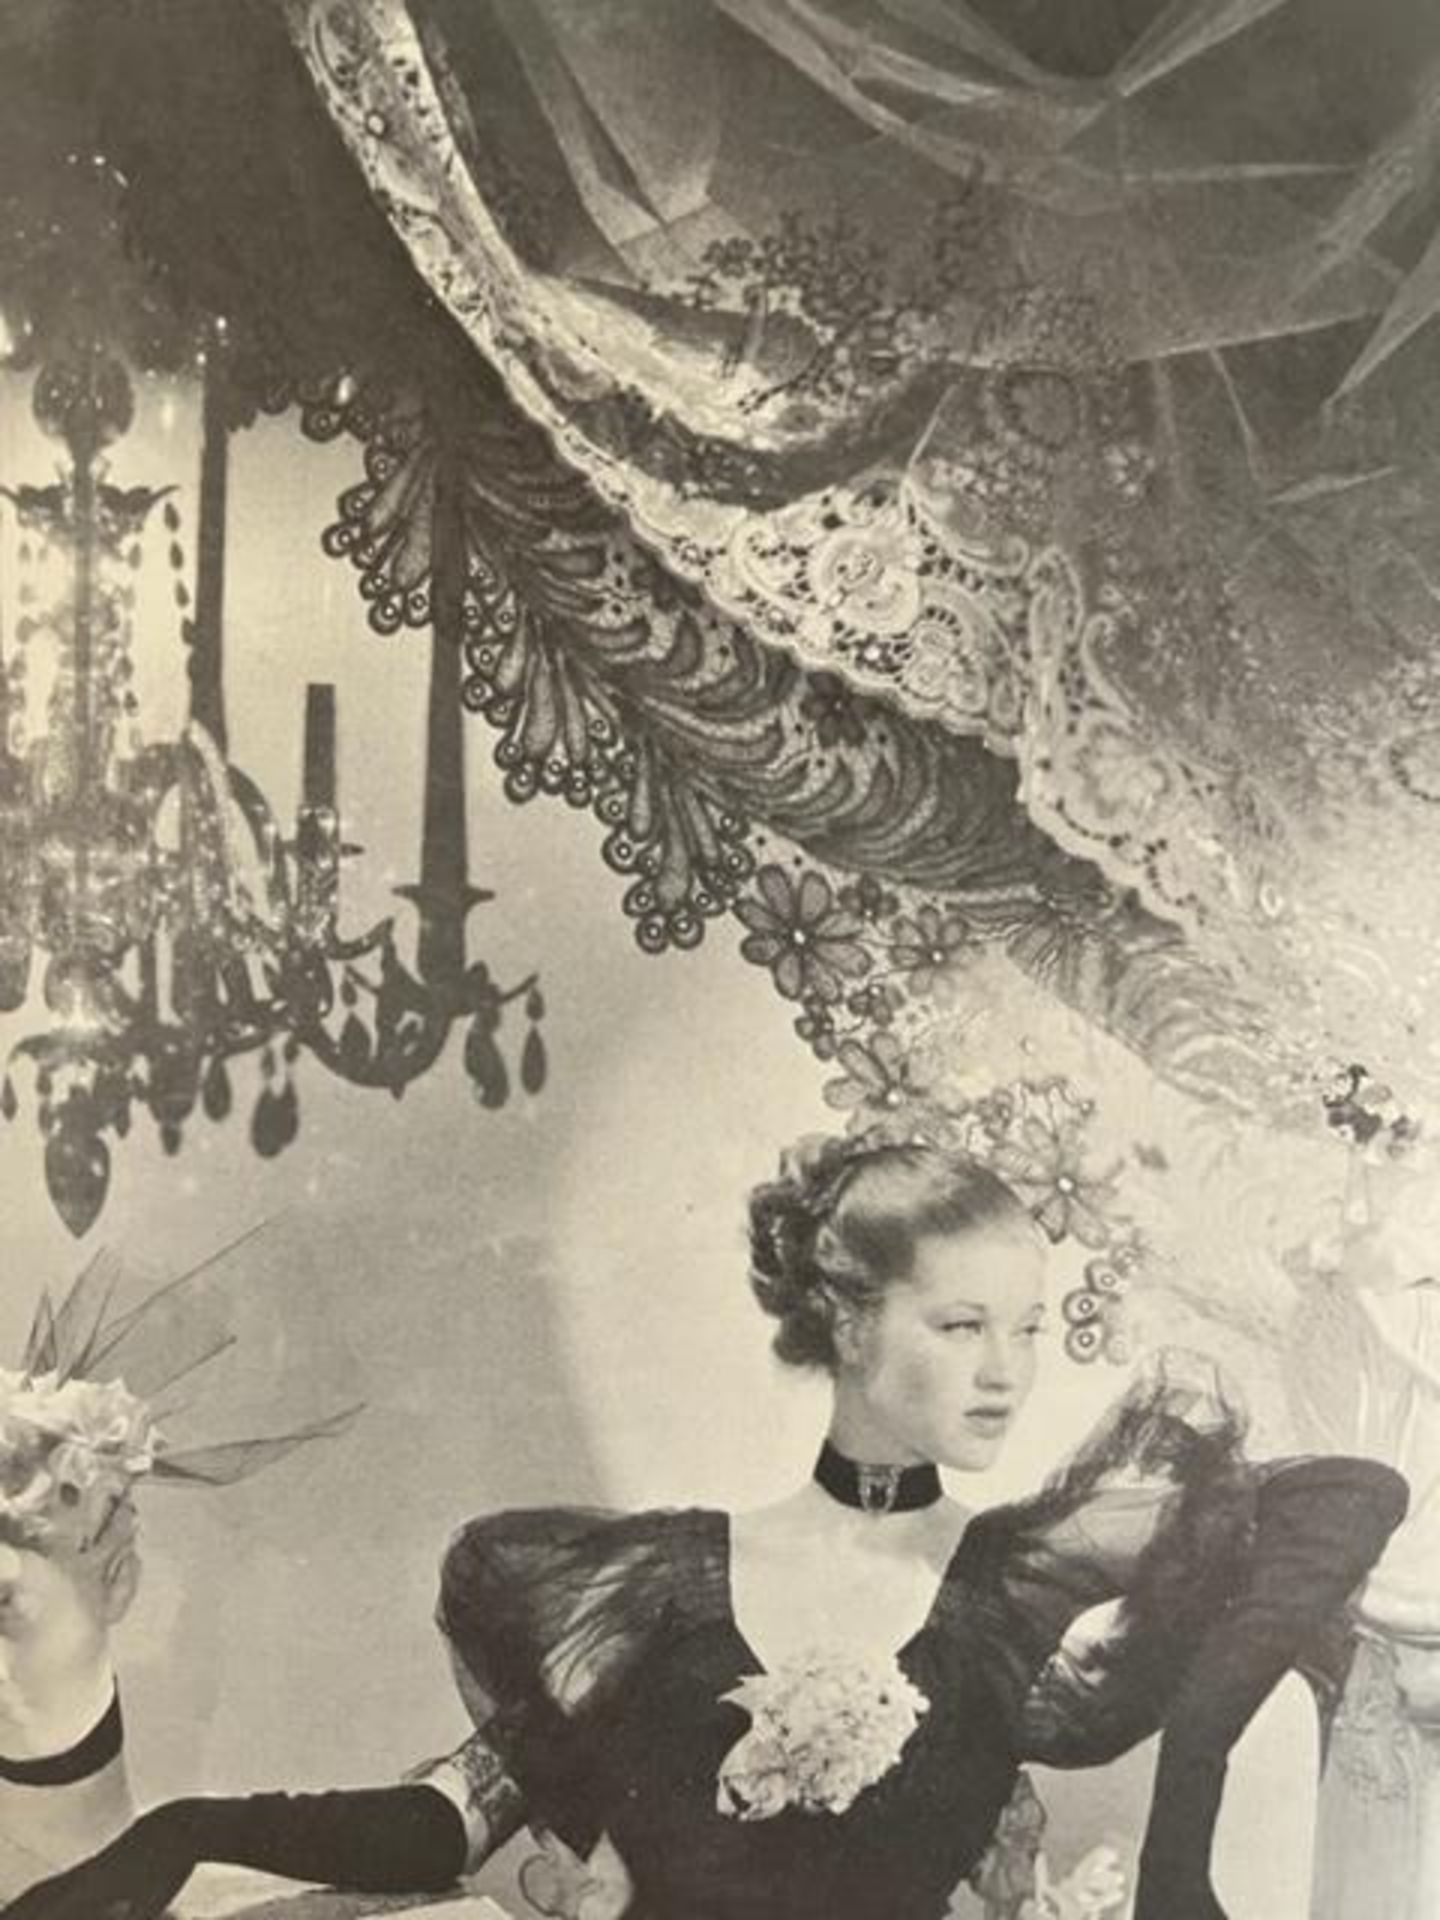 Cecil Beaton "Mary Taylor" Print. - Image 3 of 6